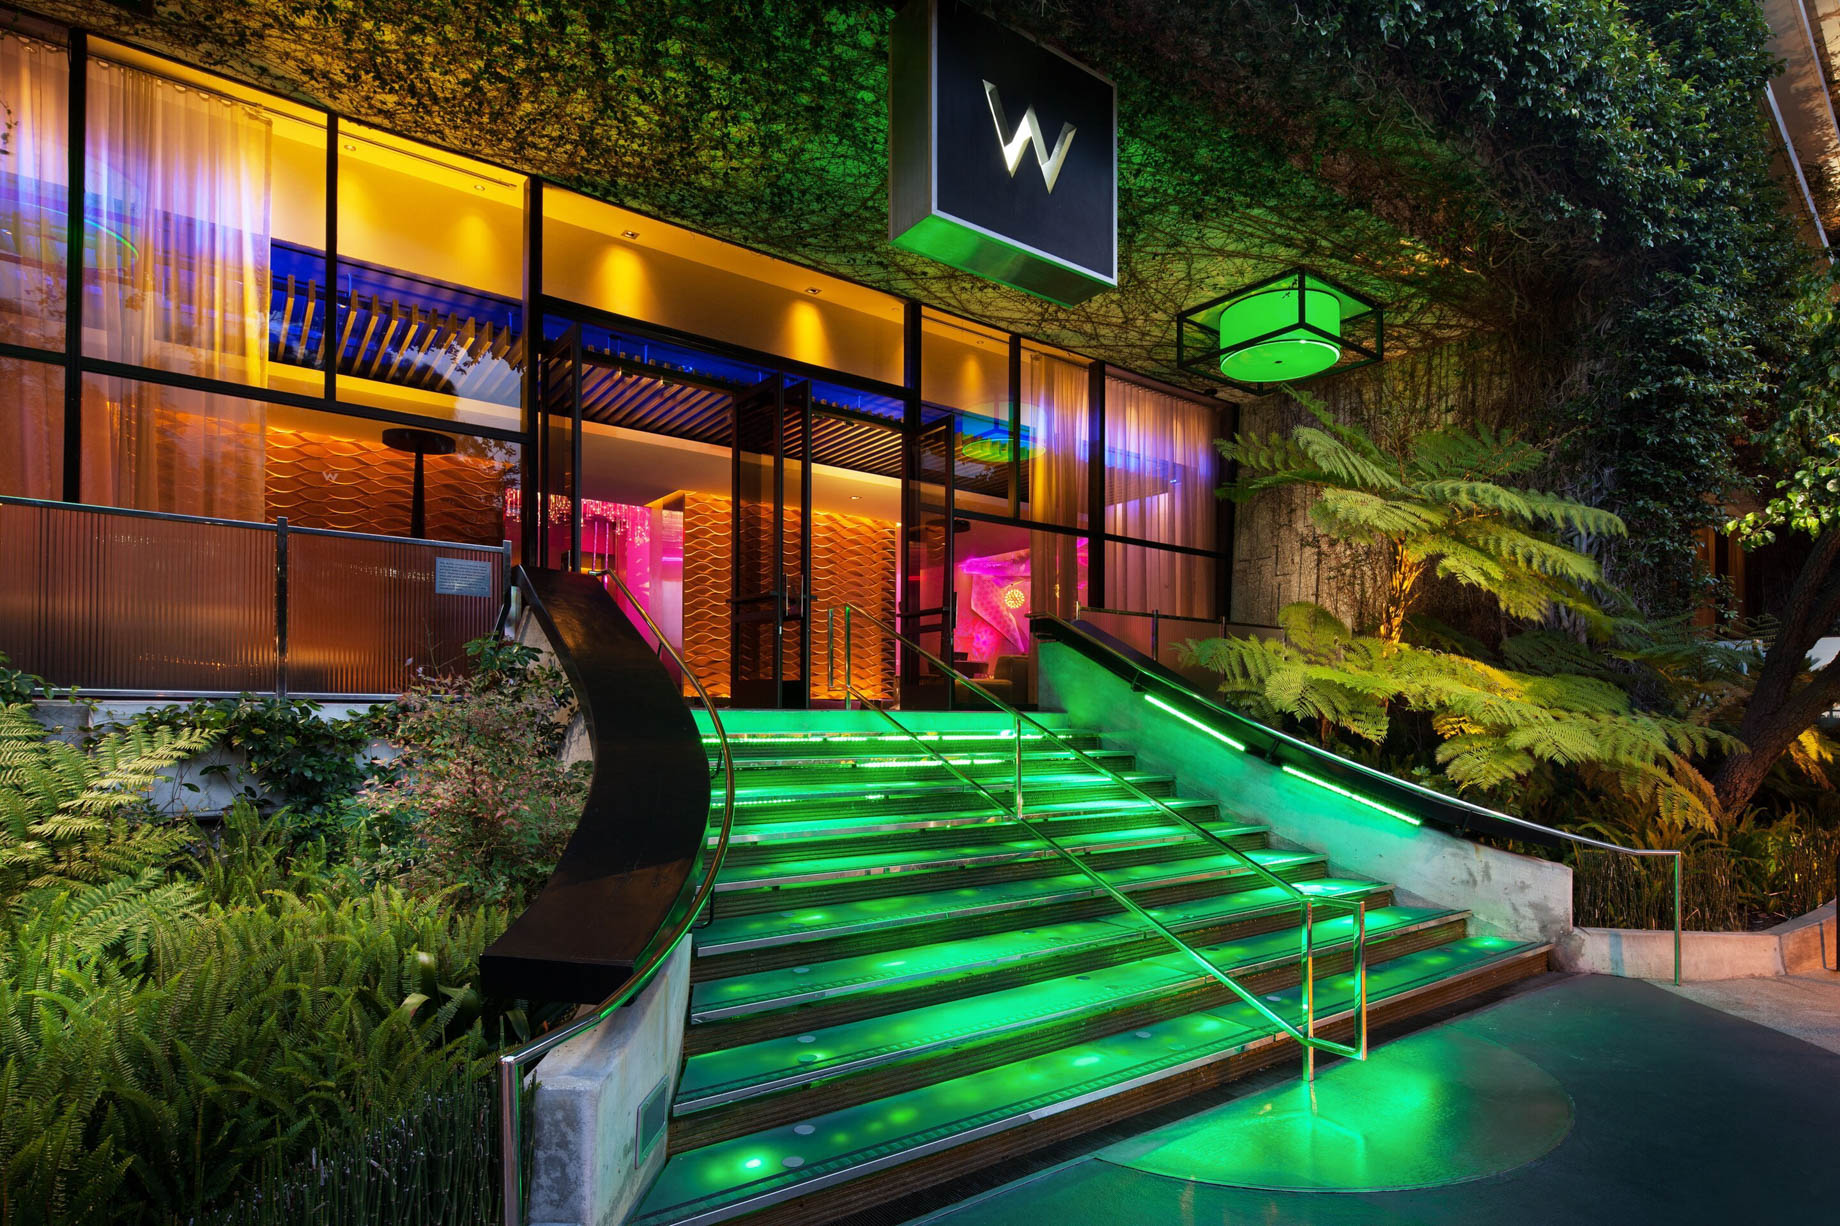 W Los Angeles West Beverly Hills Hotel - Los Angeles, CA, USA - Hotel Exterior Entrance